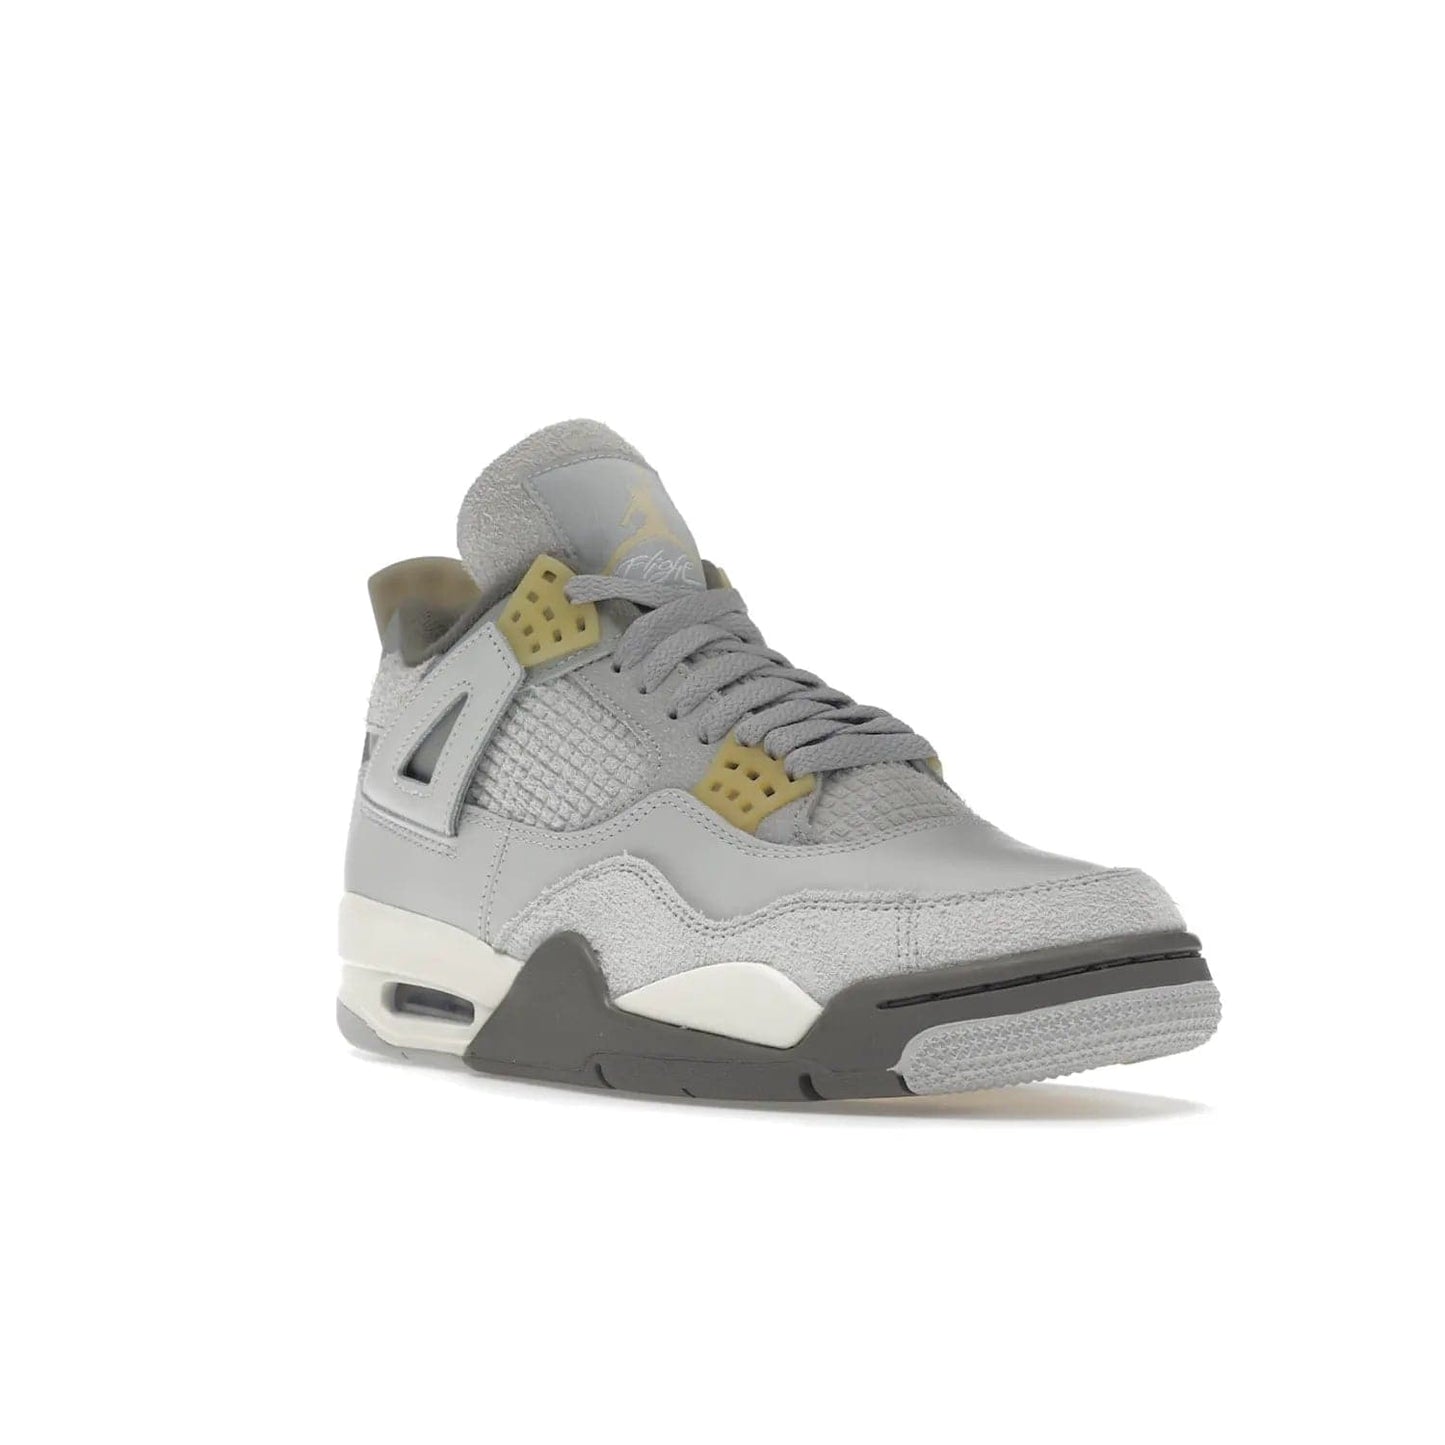 Jordan 4 Retro SE Craft Photon Dust - Image 6 - Only at www.BallersClubKickz.com - Upgrade your shoe collection with the Air Jordan 4 Retro SE Craft Photon Dust. This luxurious sneaker features a combination of suede and leather with unique grey tones like Photon Dust, Pale Vanilla, Off White, Grey Fog, Flat Pewter, and Sail. Available February 11, 2023.